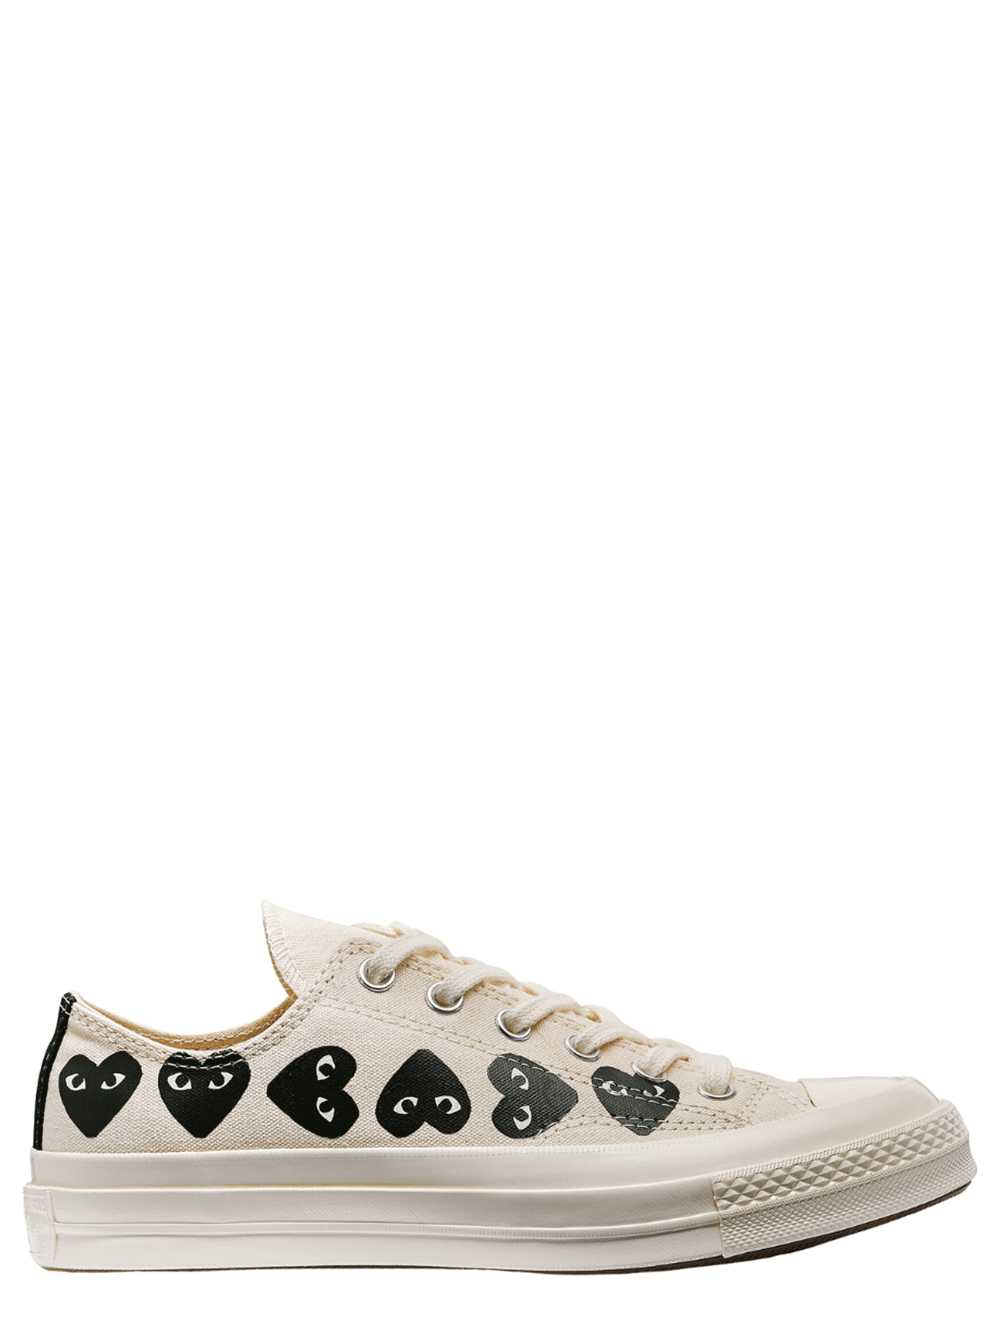 COMME-des-GARCONS-PLAY-CONVERSE-MULTI-HEART-Chuck-Taylor-All-Star-_70-Low-Sneakers-White-1